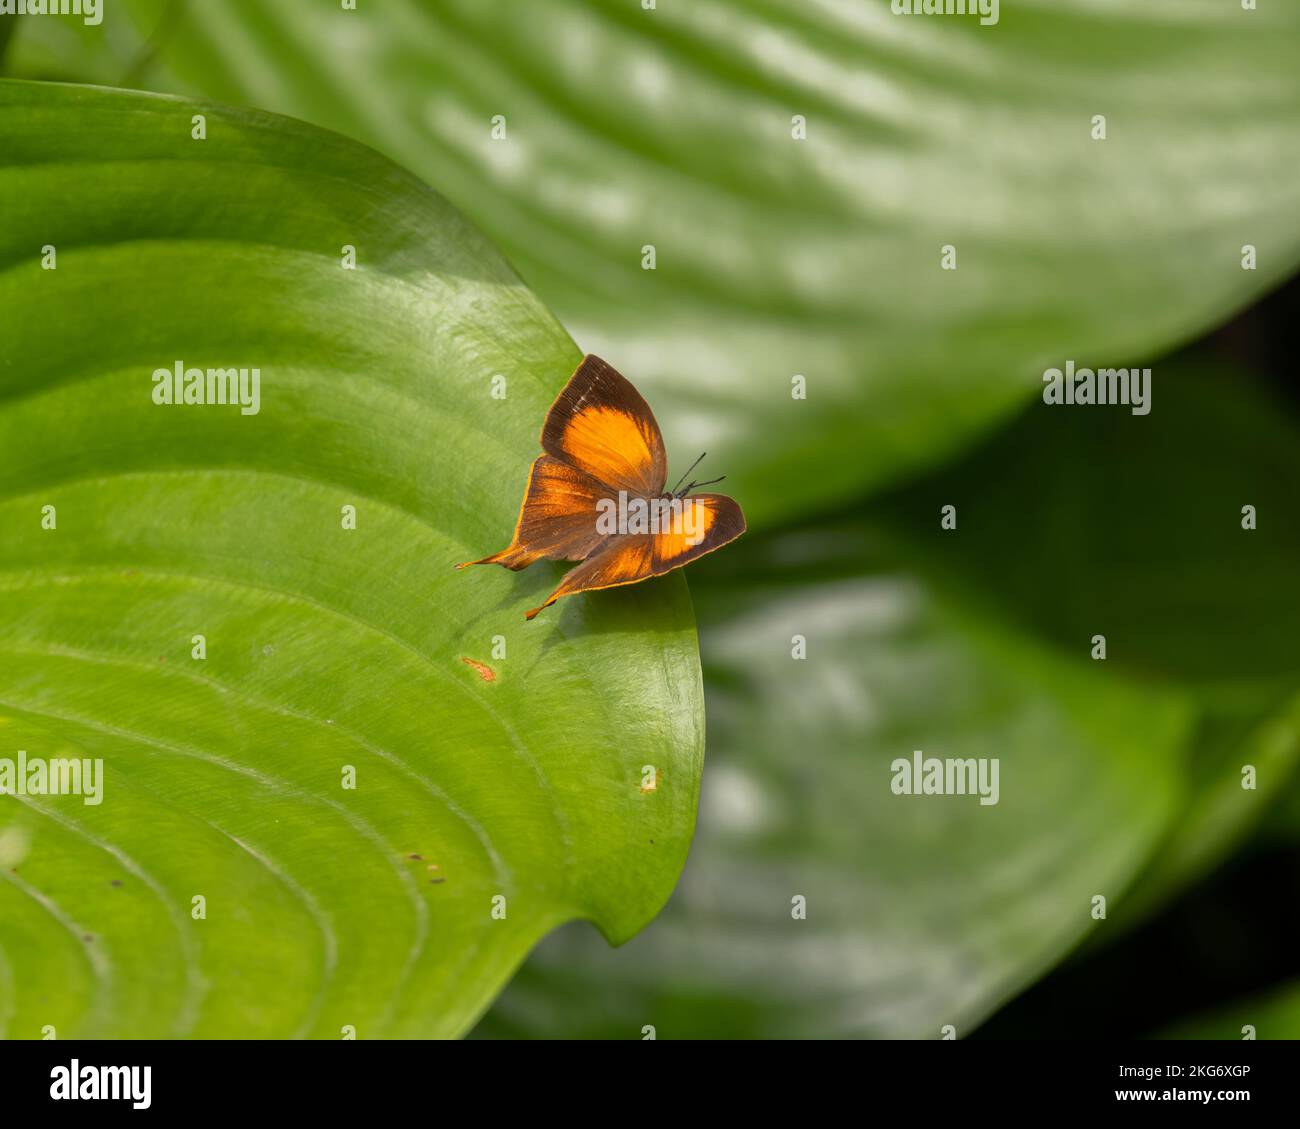 A beautiful Yamfly (Loxura atymnus) butterfly resting on a large leaf in the garden with it's wings spread open at Mangalore, Karnataka in India. Stock Photo